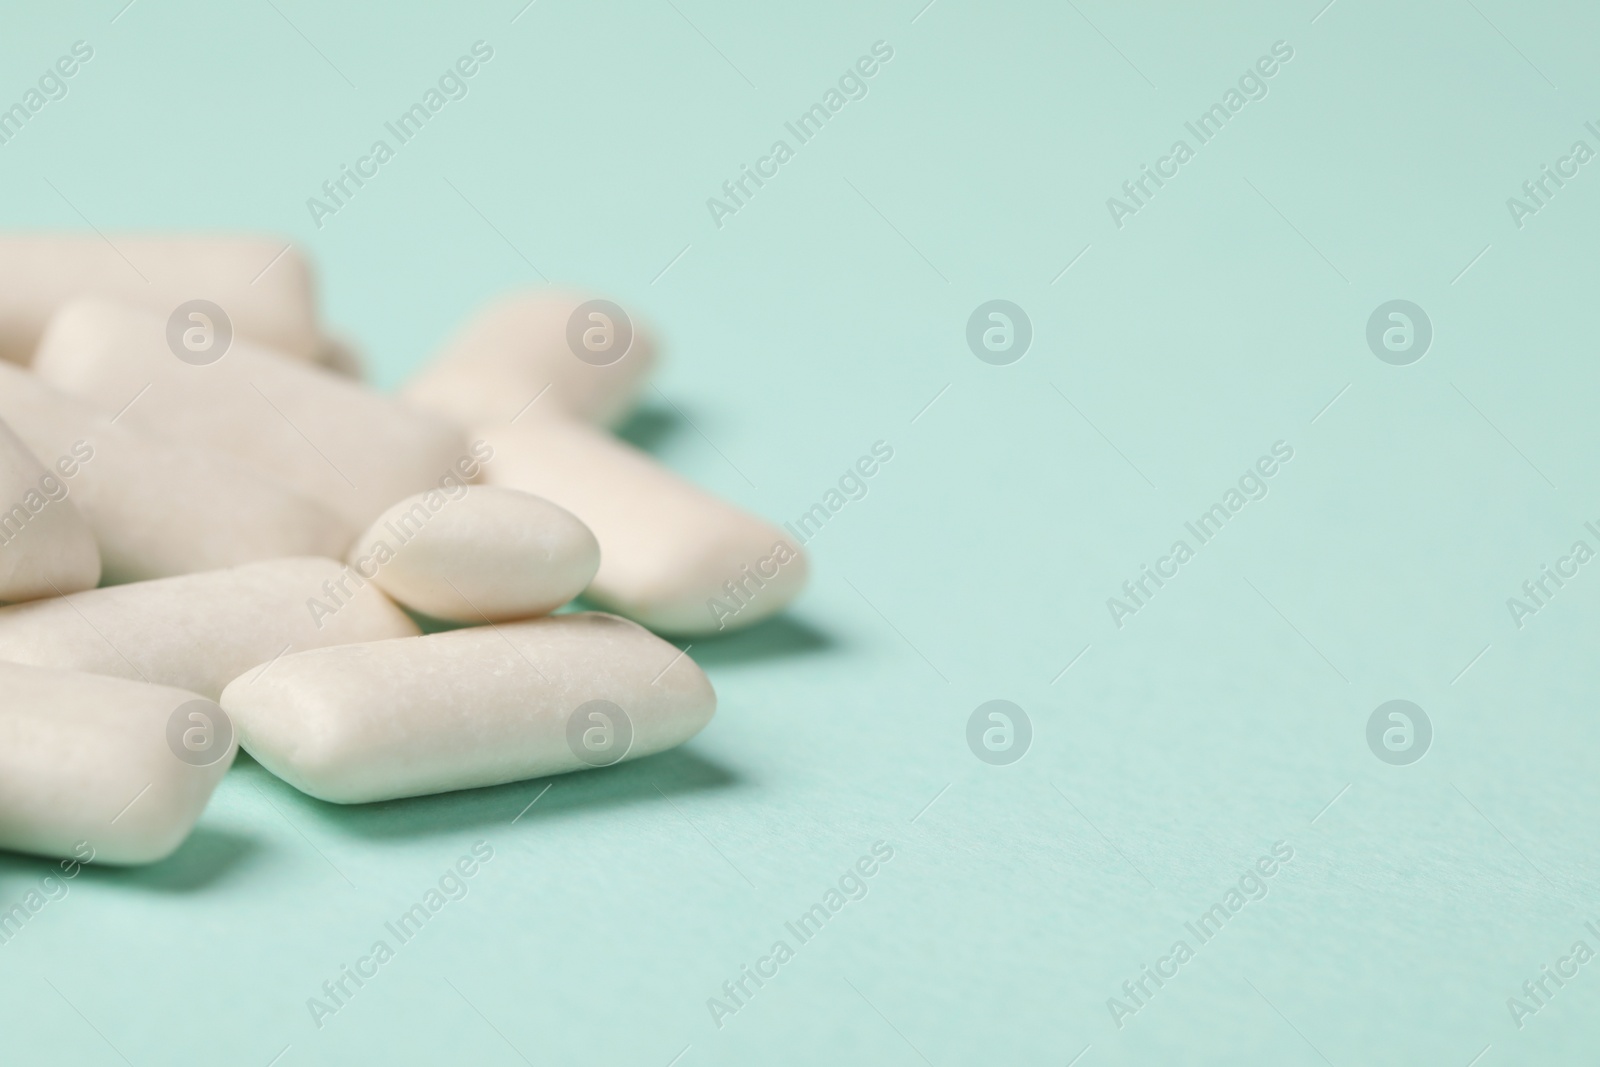 Photo of Many chewing gum pieces on turquoise background, closeup. Space for text